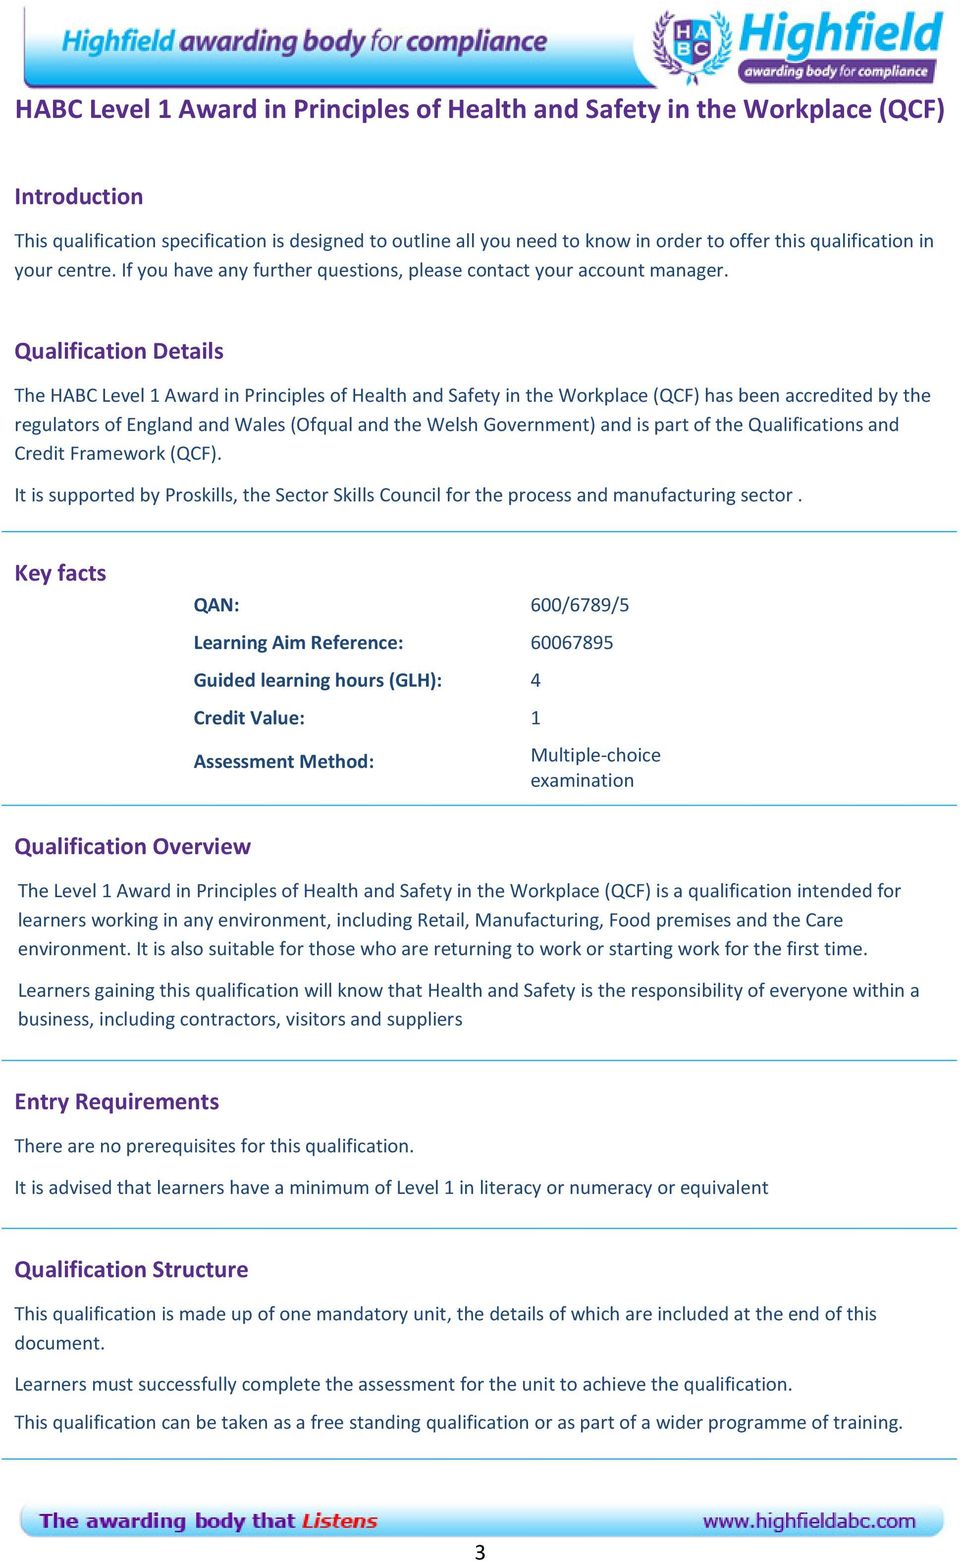 Qualification Details The HABC Level 1 Award in Principles of Health and Safety in the Workplace (QCF) has been accredited by the regulators of England and Wales (Ofqual and the Welsh Government) and